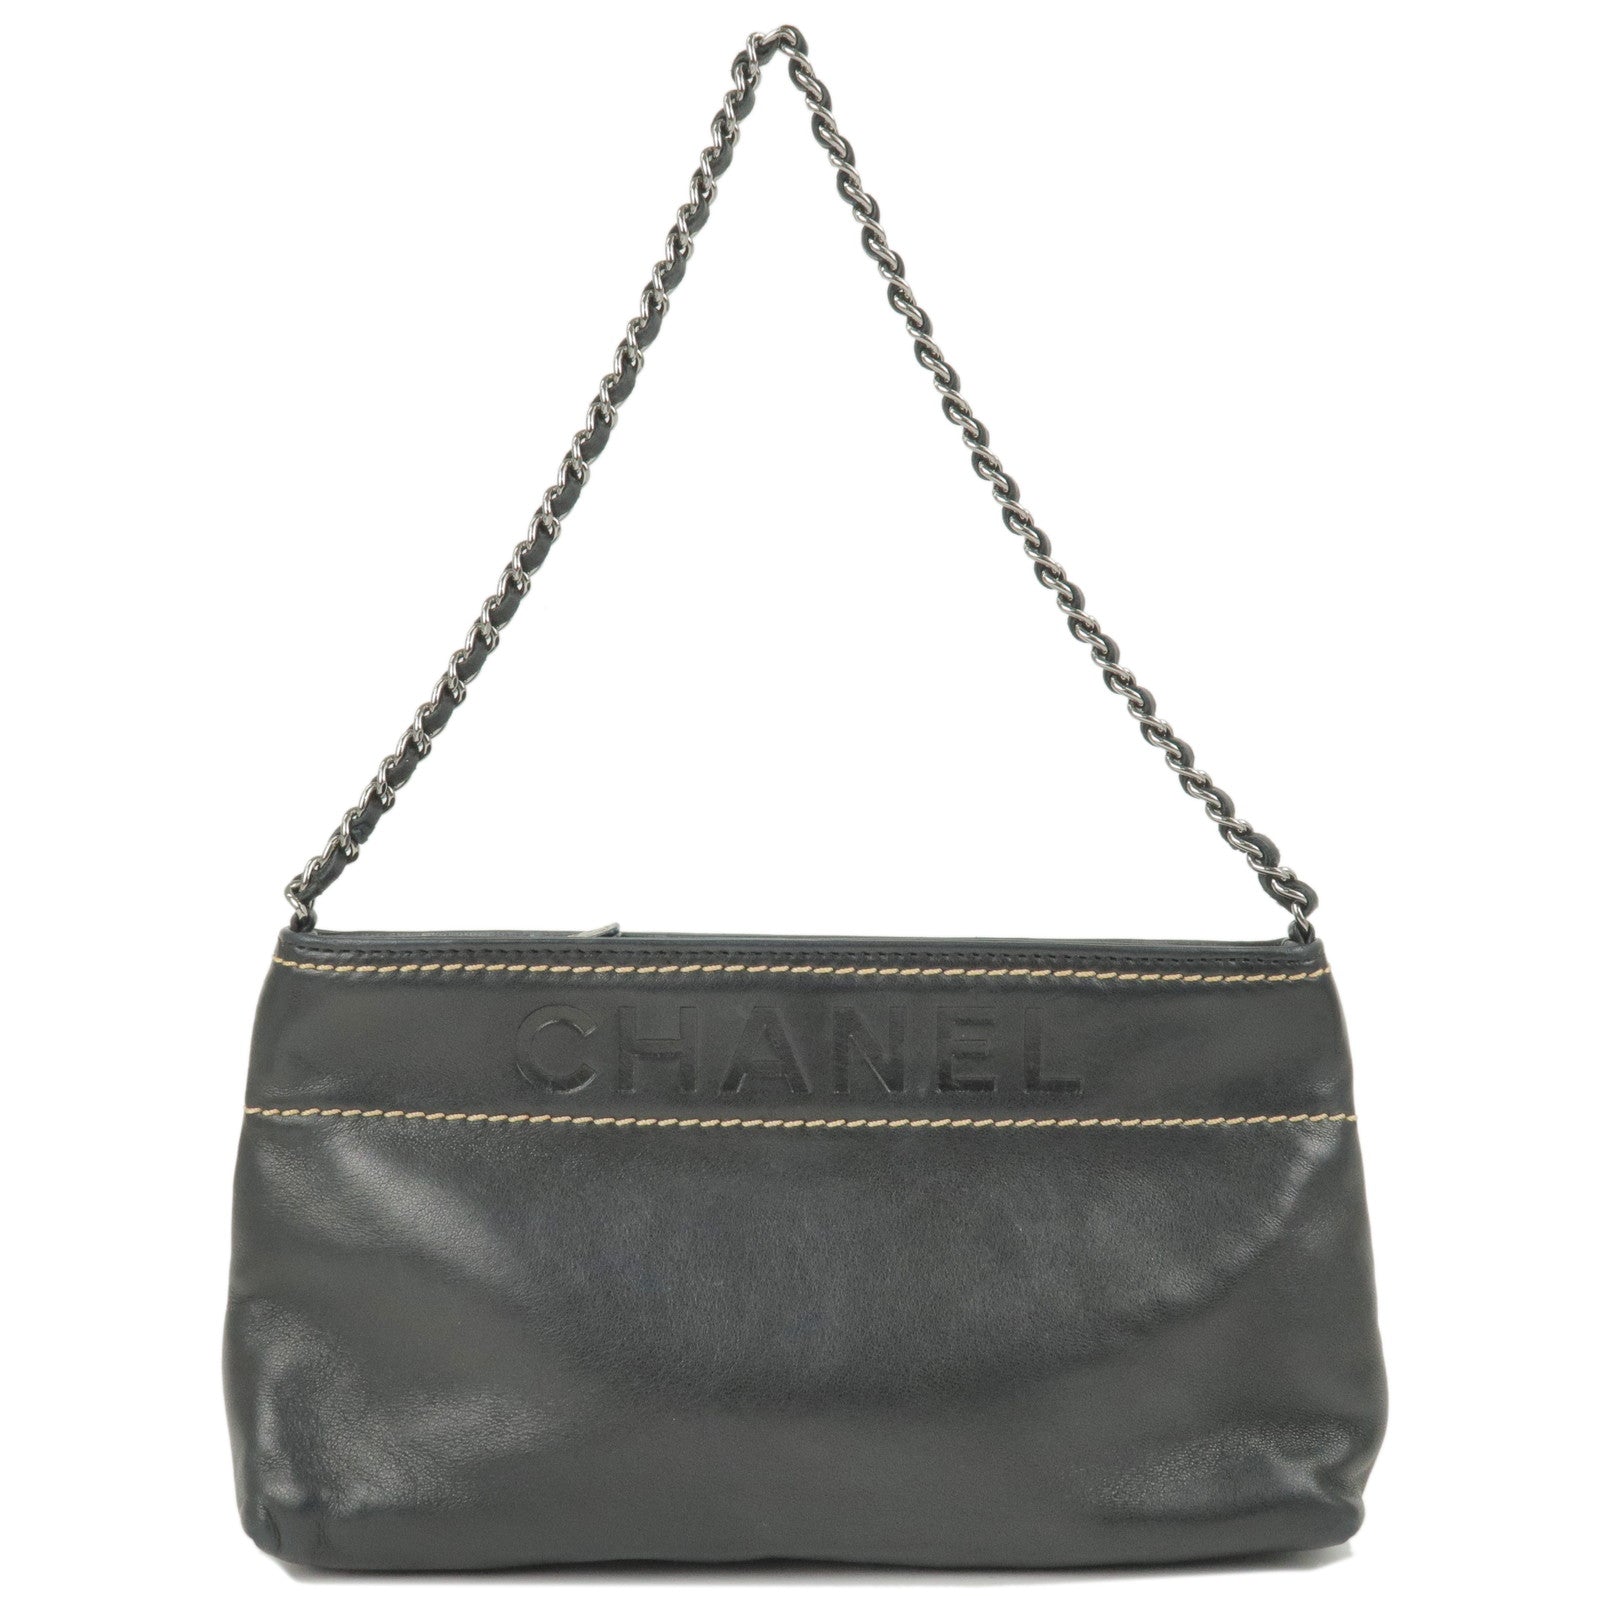 CHANEL-Leather-Chain-Accessory-Pouch-Black-Silver-Hardware